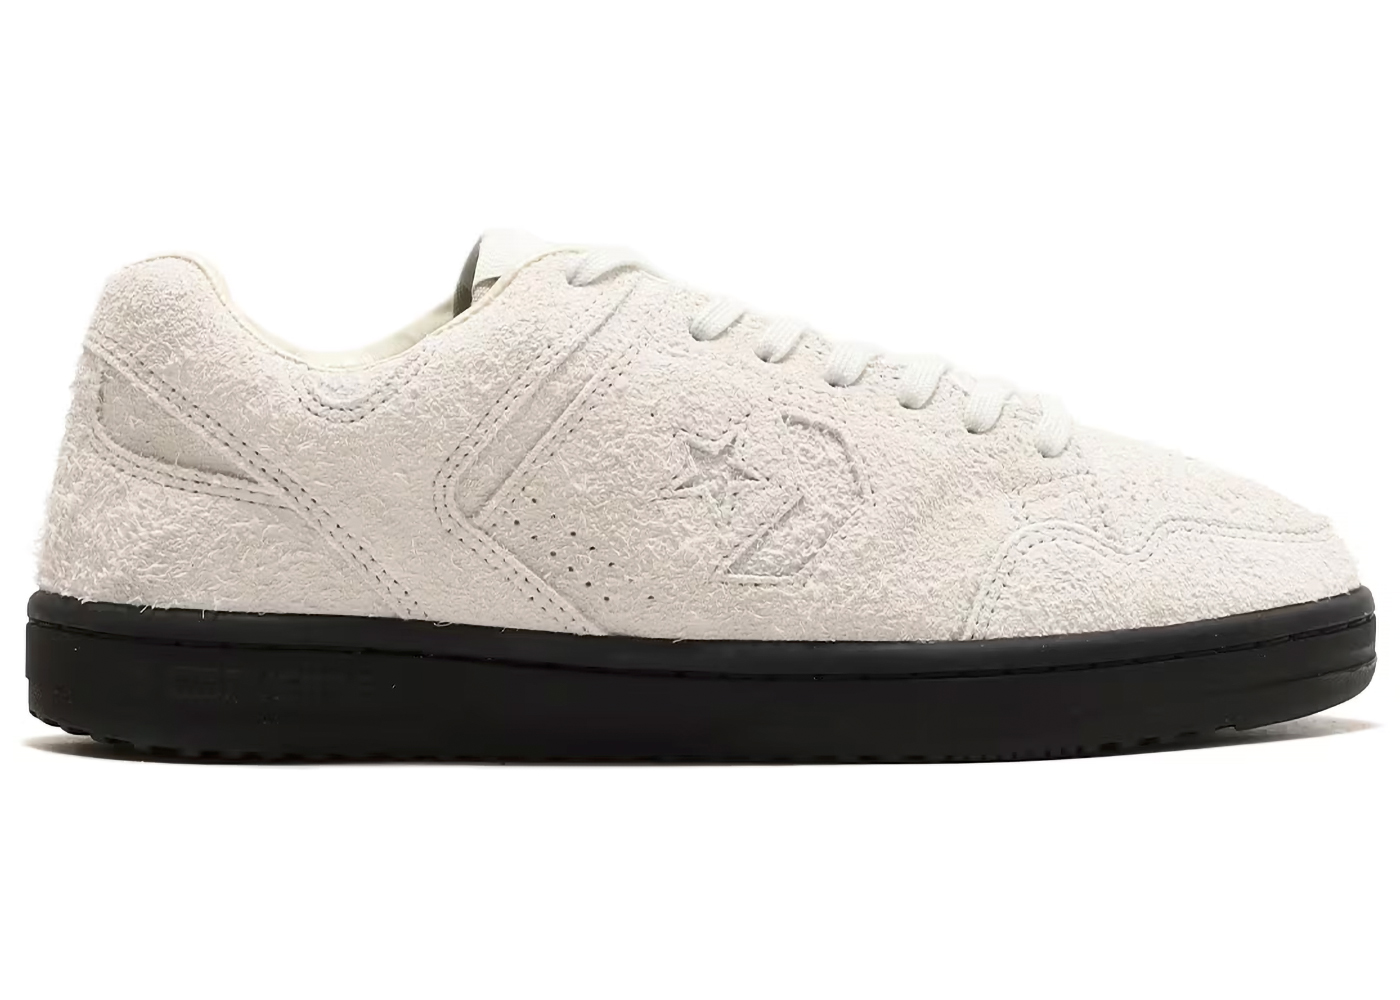 Converse Weapon Sk OX White Suede Men's - 34201250 - US